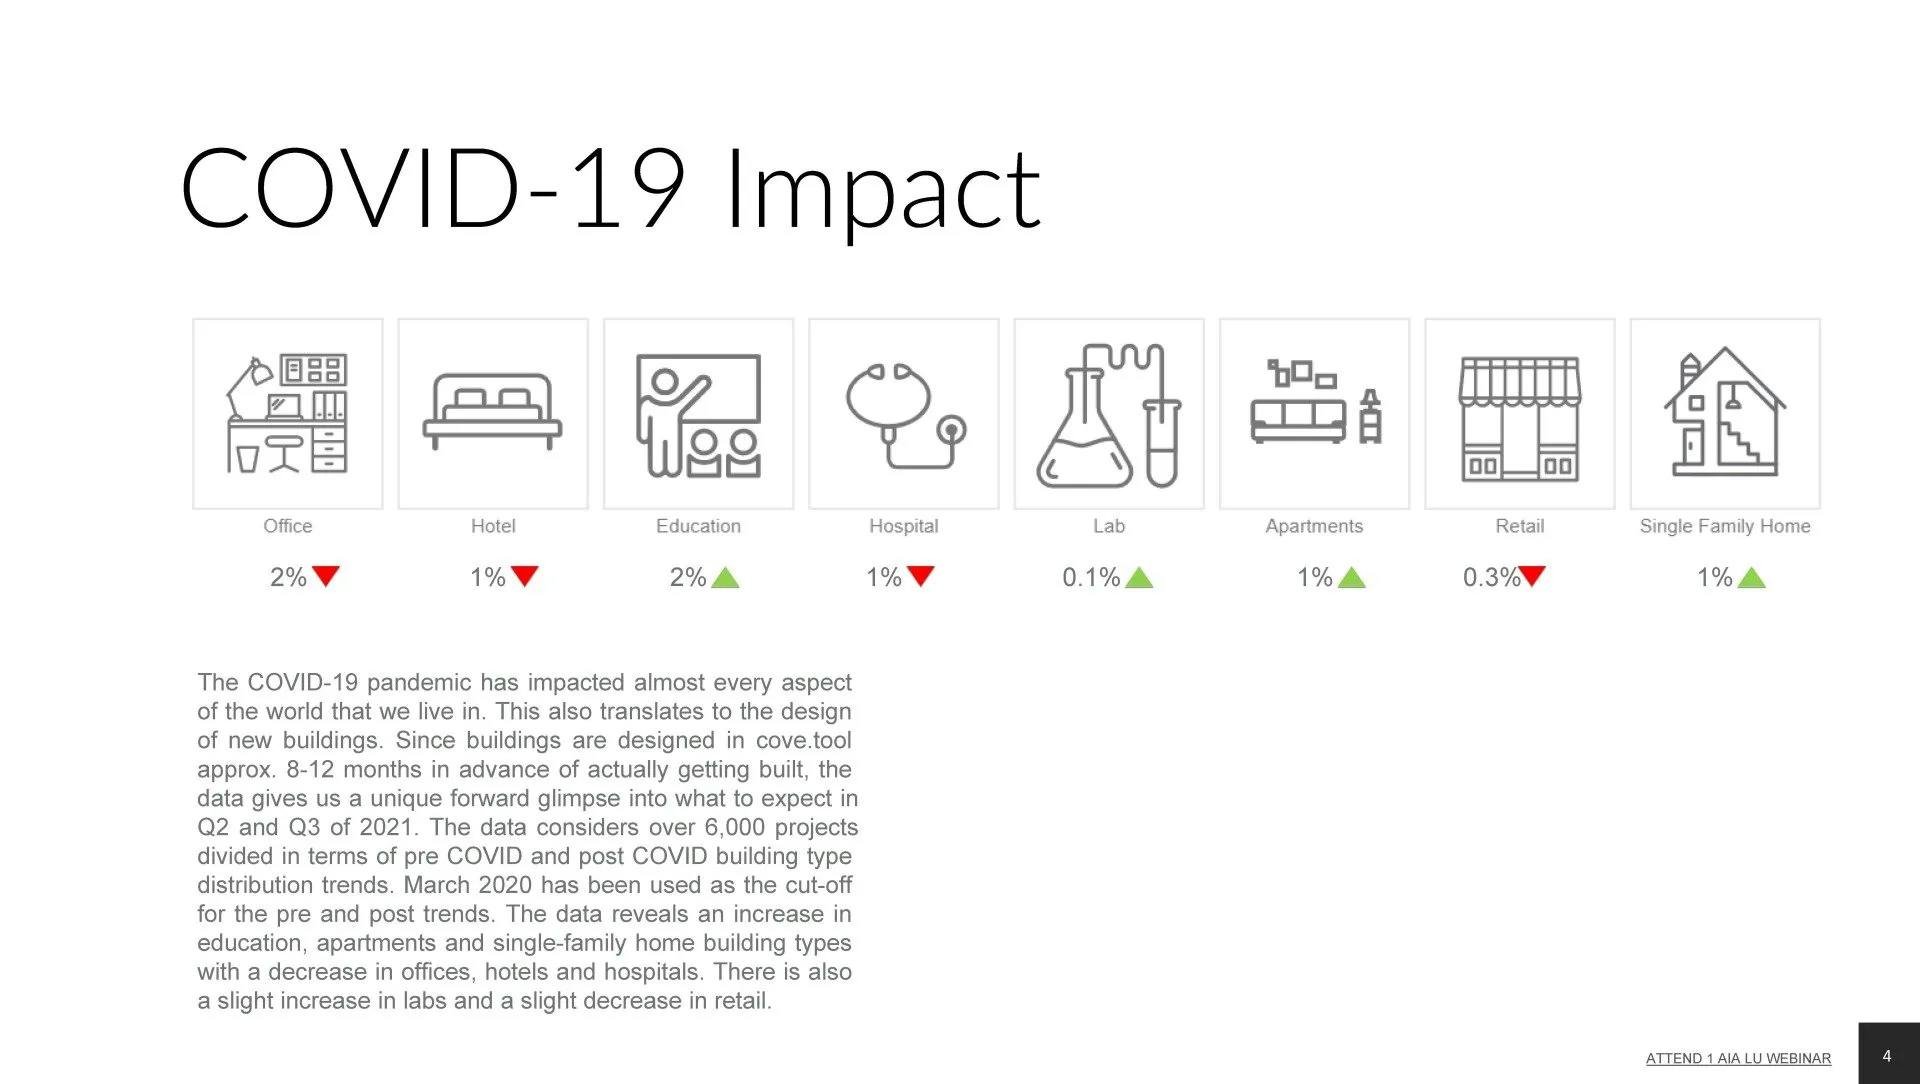 covid-19 impact on buildings